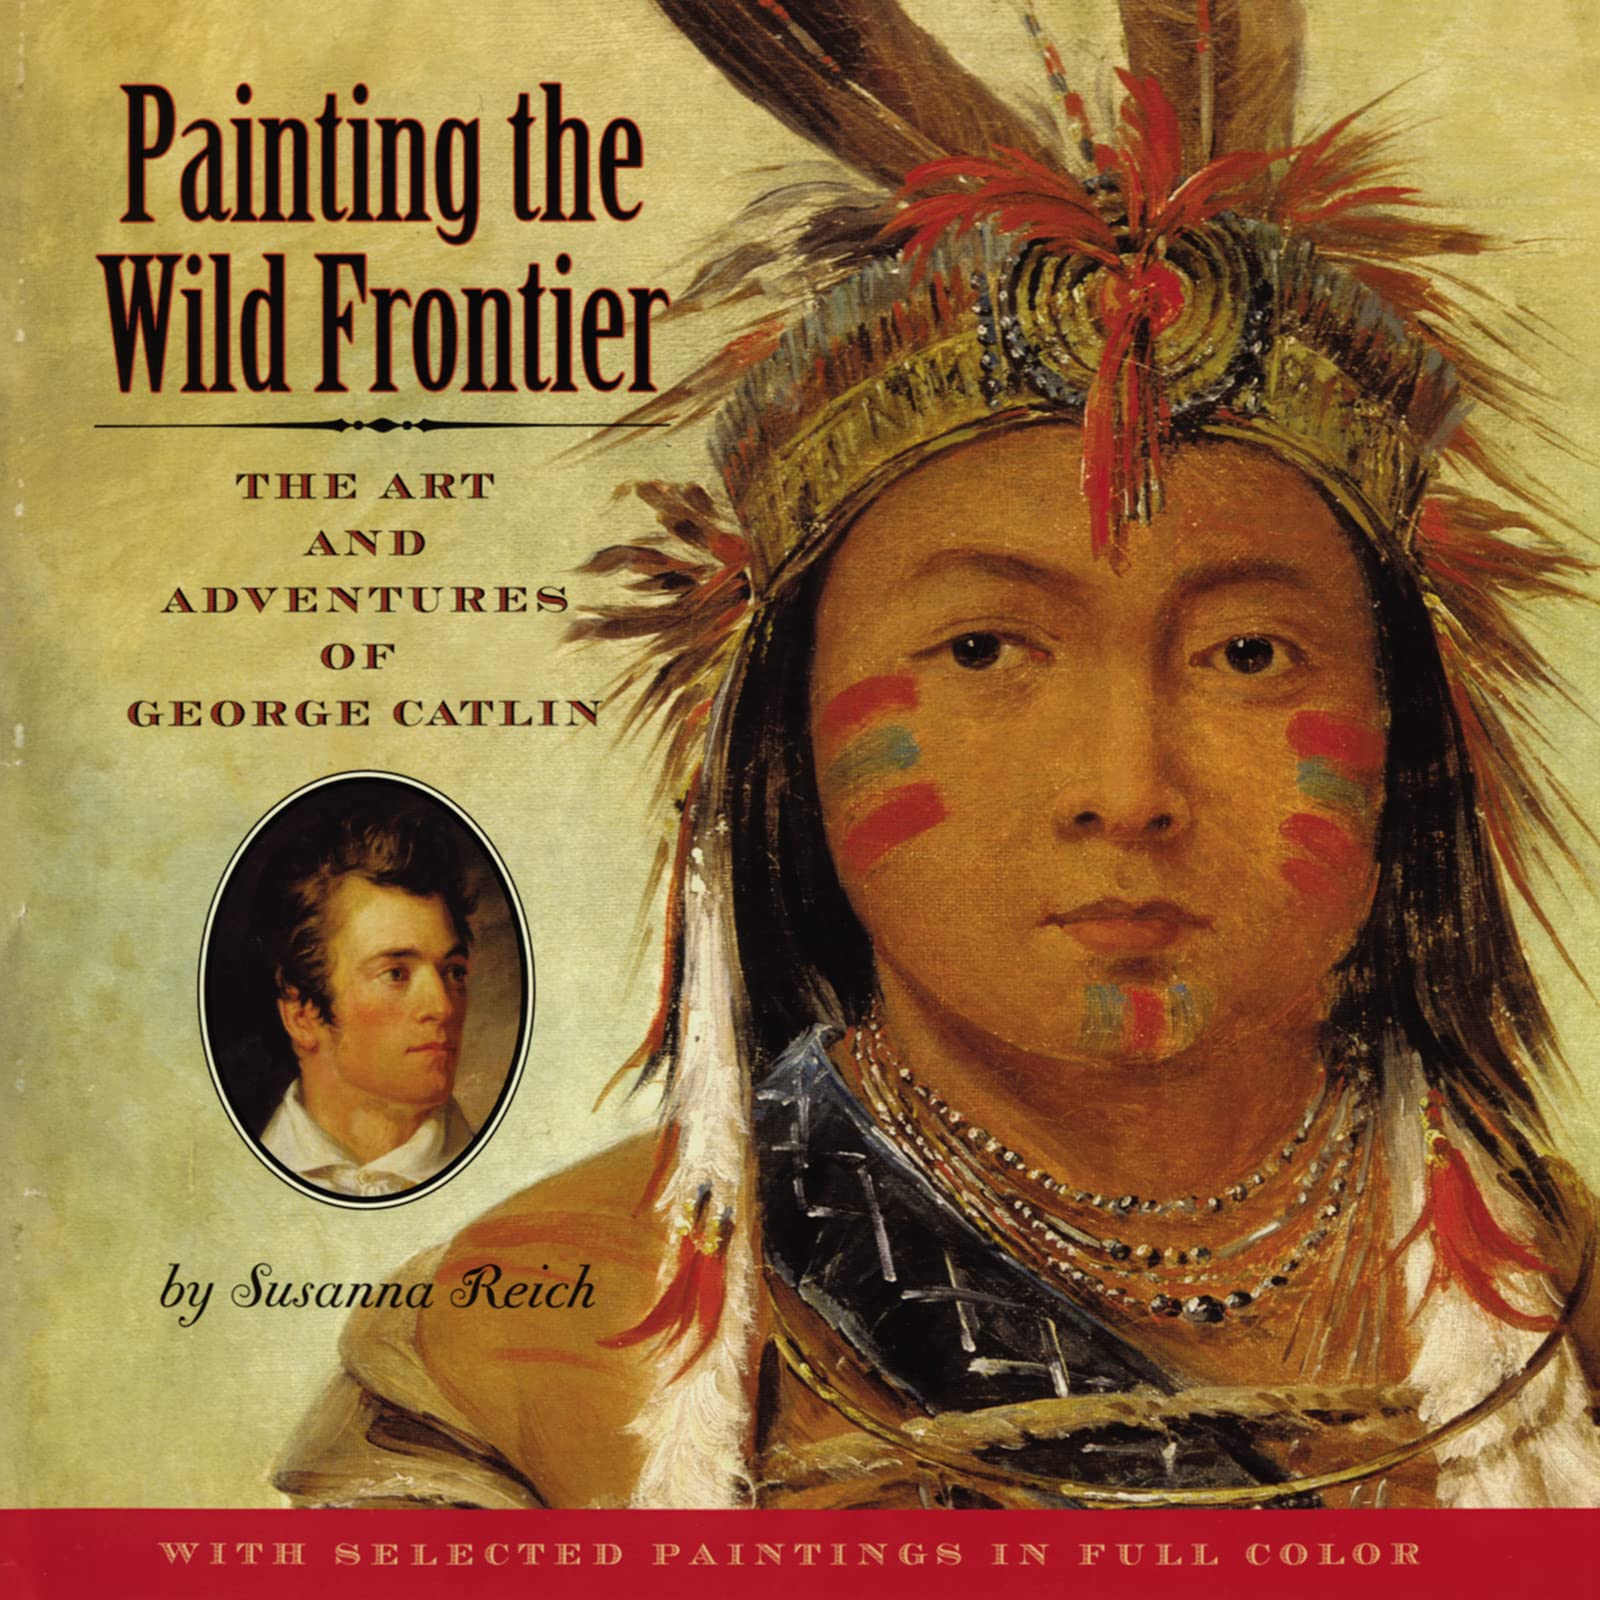 Book cover of Painting the Wild Frontier, written by Susanna Reich